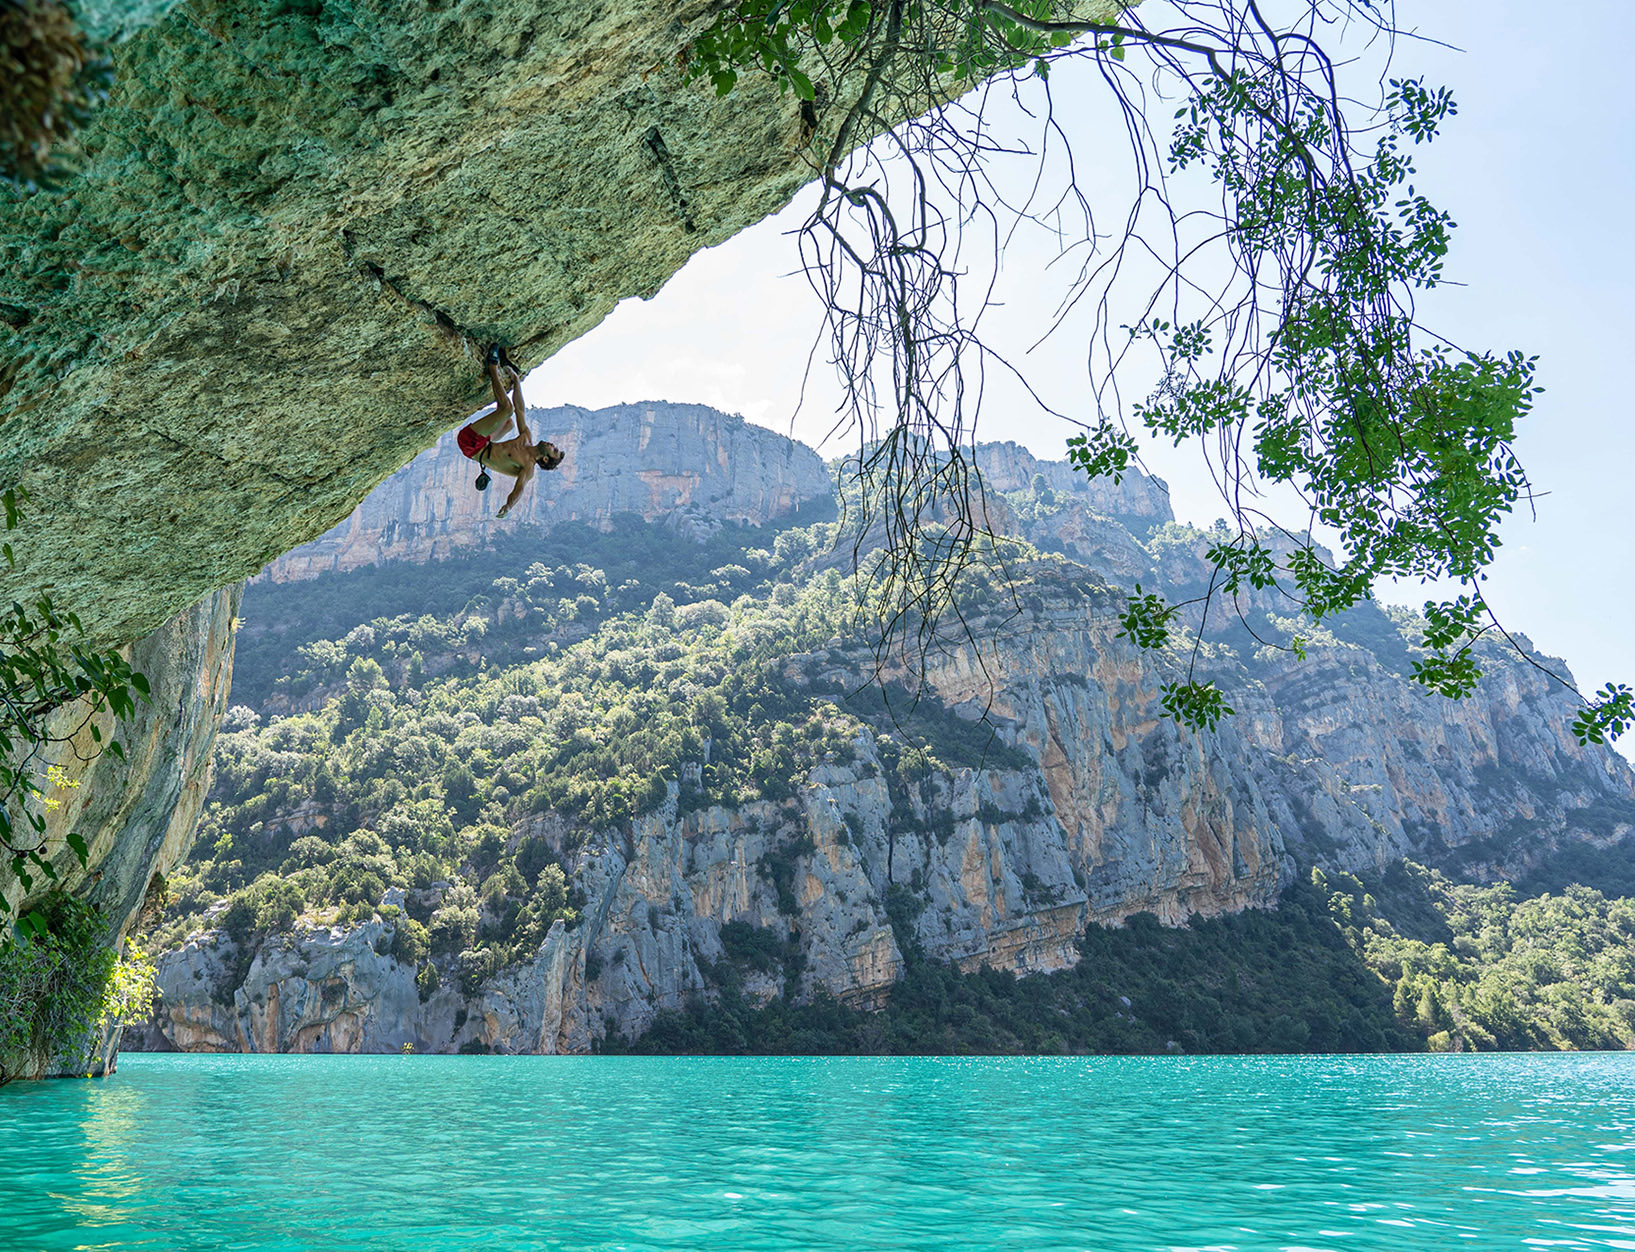 Chris Sharma - First ascent of Trick or Tree 8b+ / 5.14a - Mont - Rebei, Spain